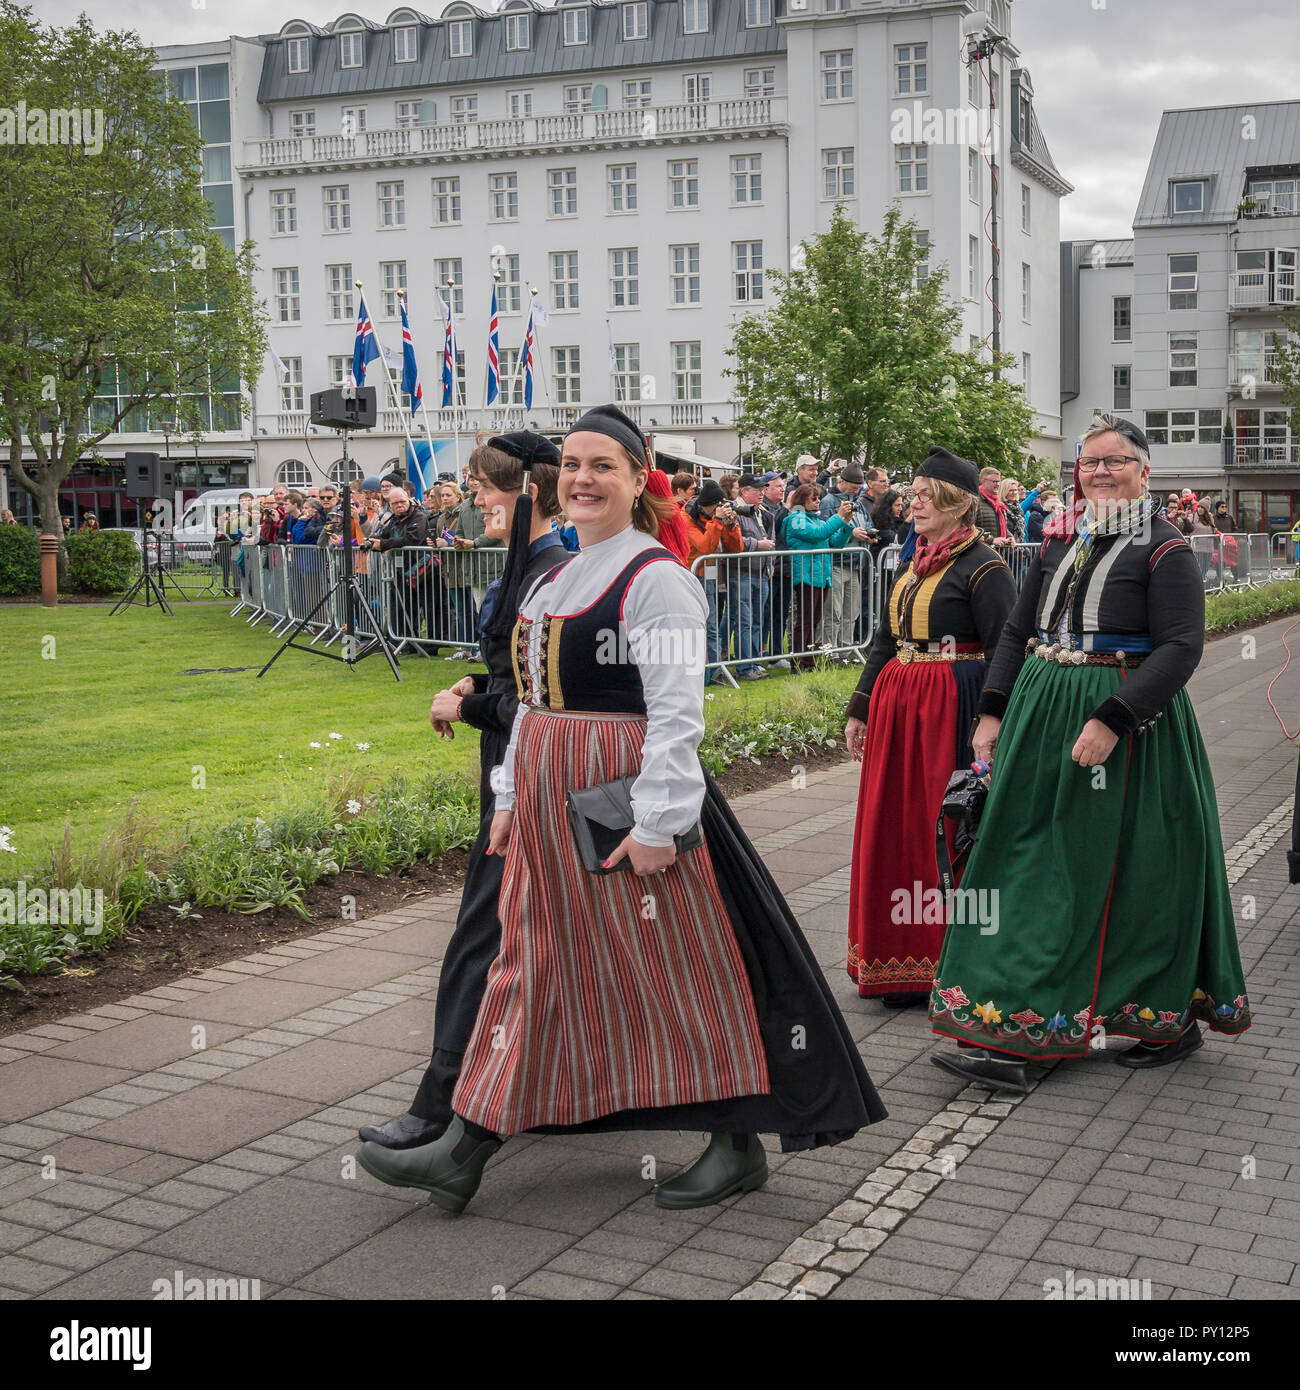 Women dressed in Iceland's national costume independence day, June 17th, Reykjavik, Iceland. Stock Photo